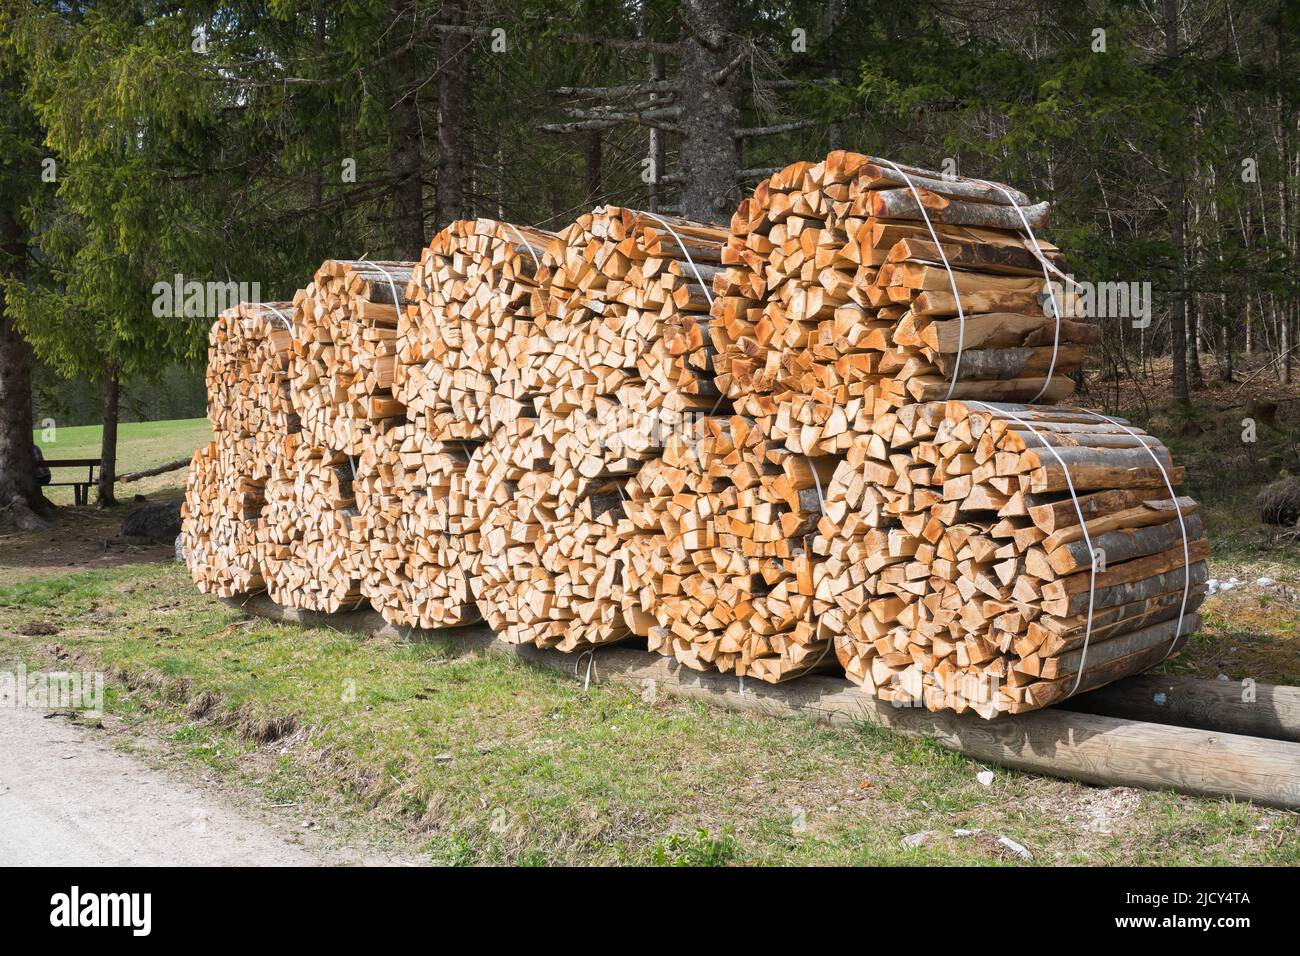 Deforestation in the nature. Pile of wood logs stumps. Sawn trees, logging timber wood industry. Stock Photo